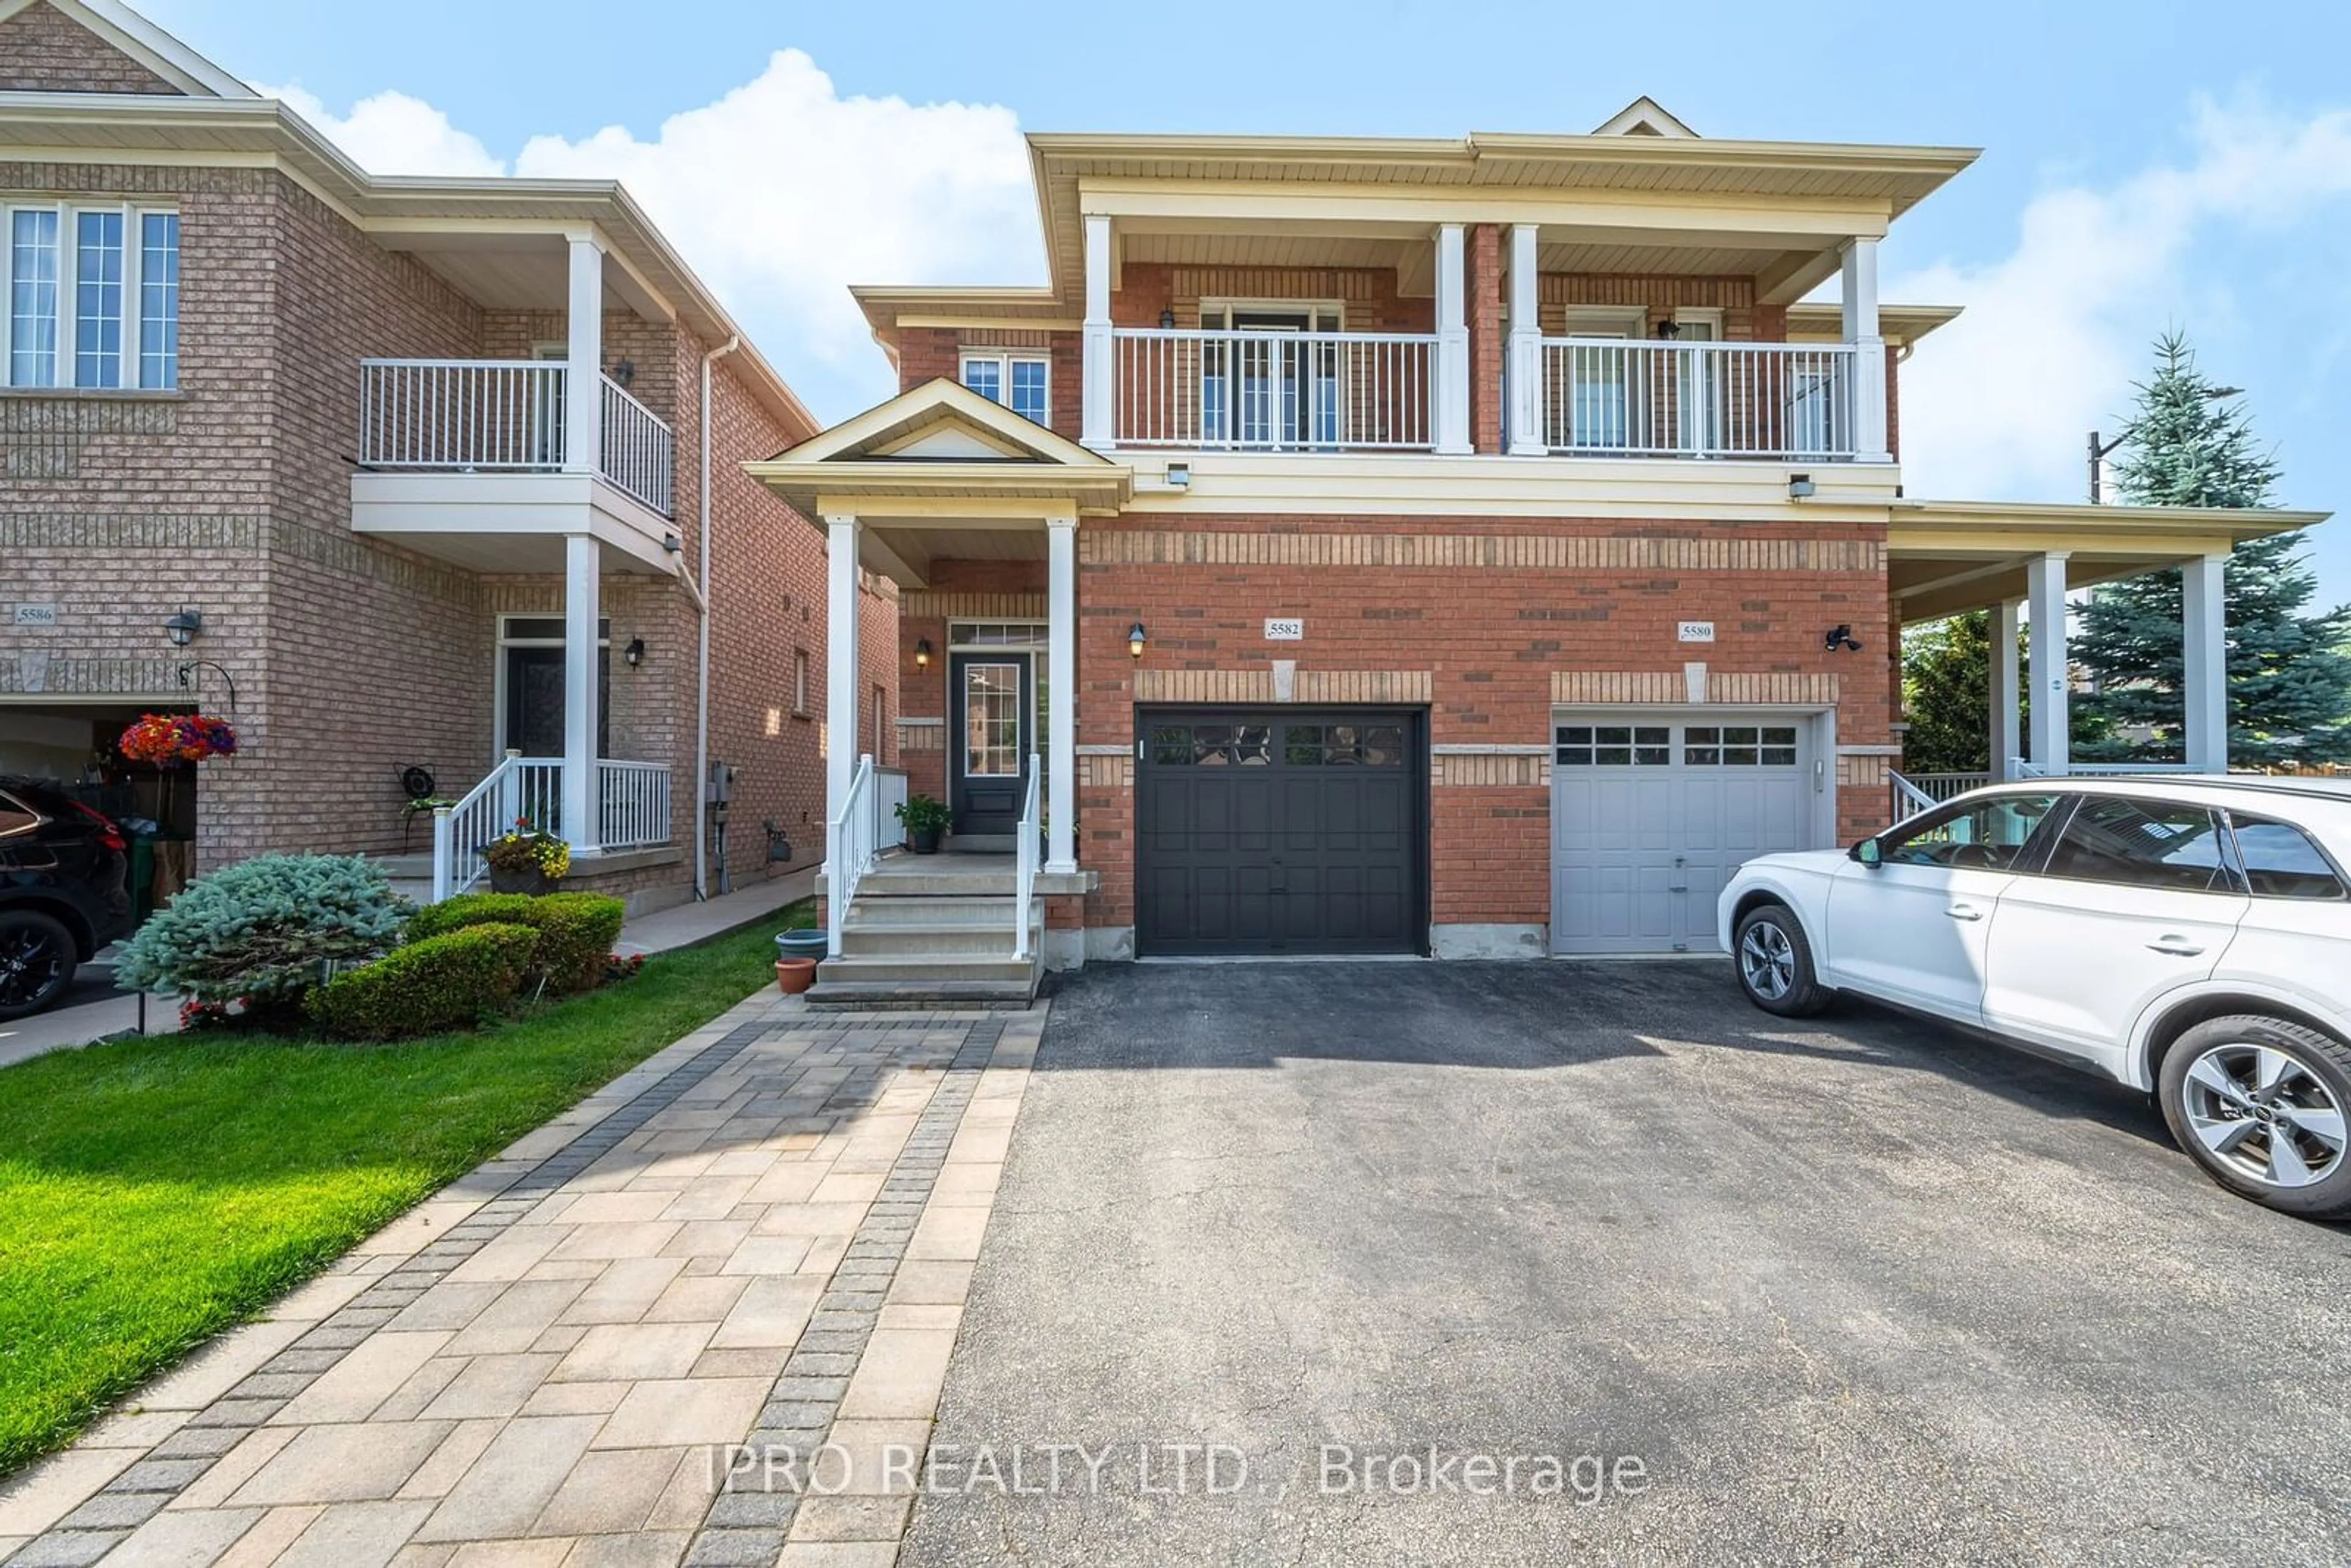 Home with brick exterior material for 5582 Fudge Terr, Mississauga Ontario L5M 0N4